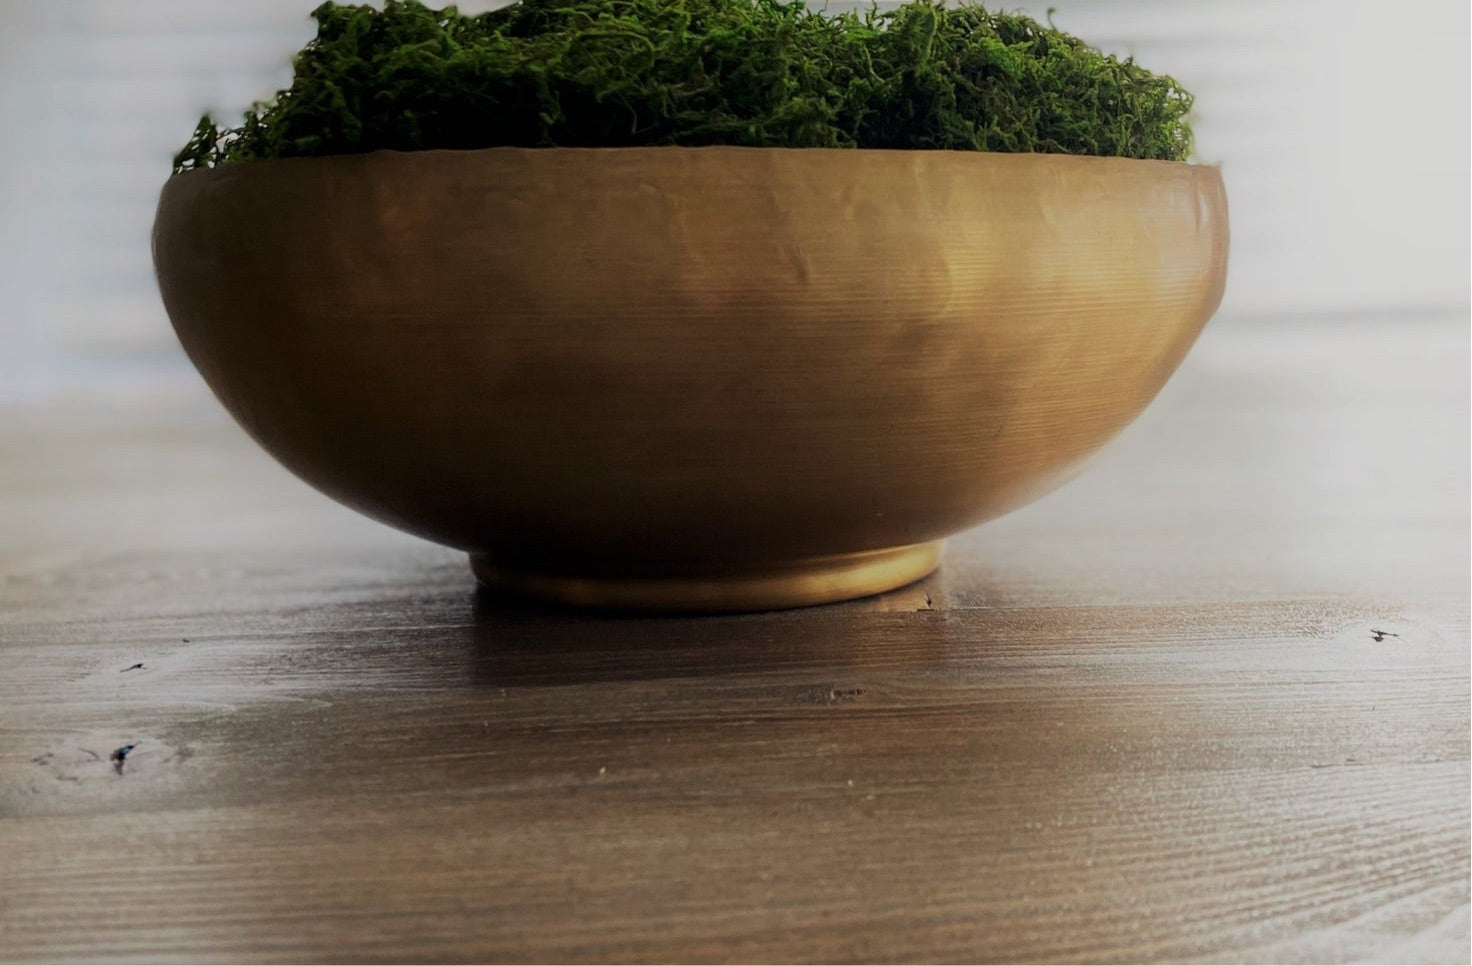 Live Mood Moss Bowl in Gold